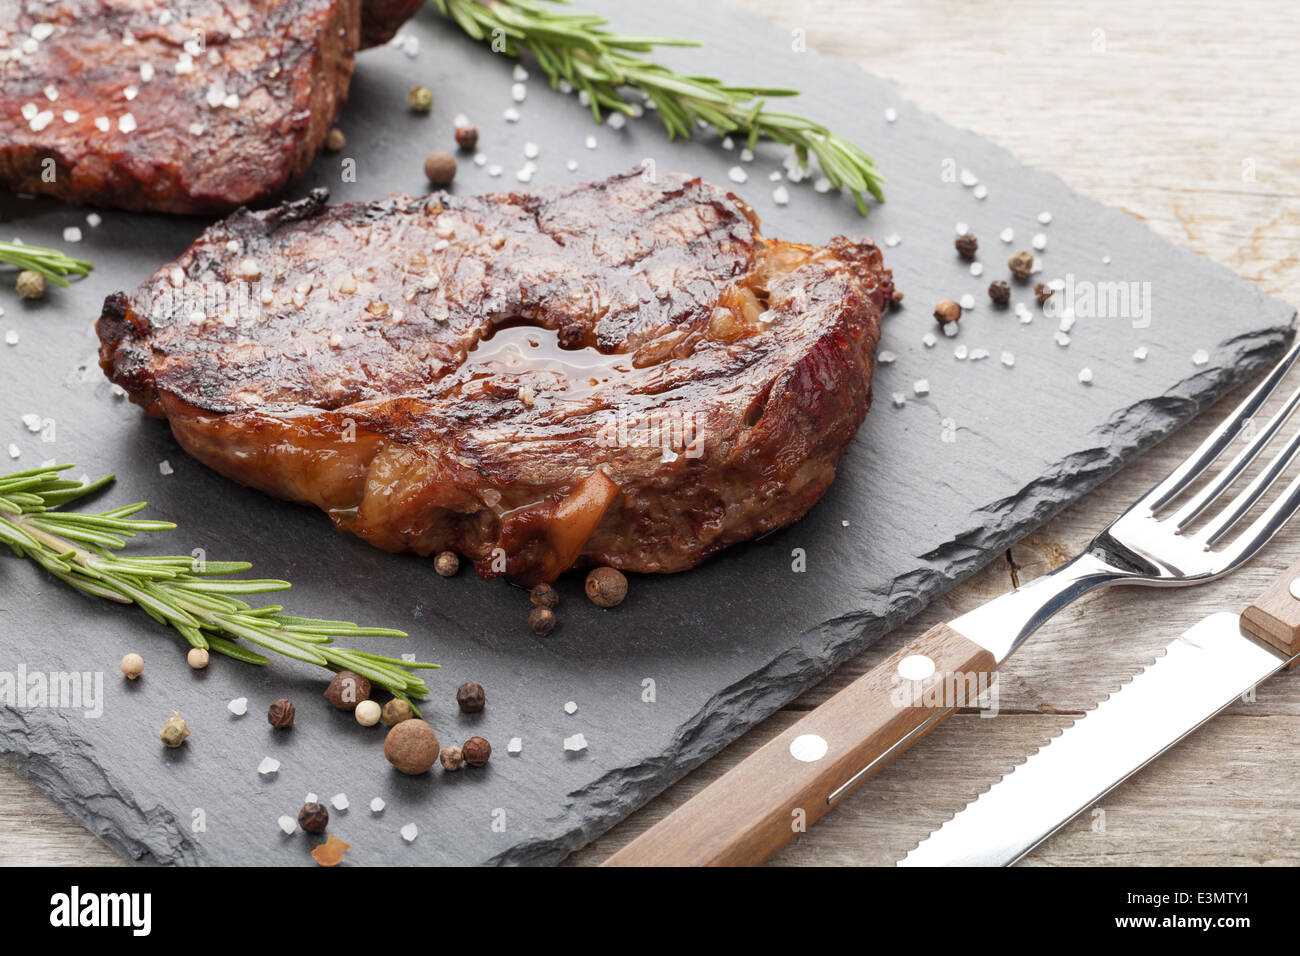 Beef steaks with rosemary and spices on wooden table Stock Photo